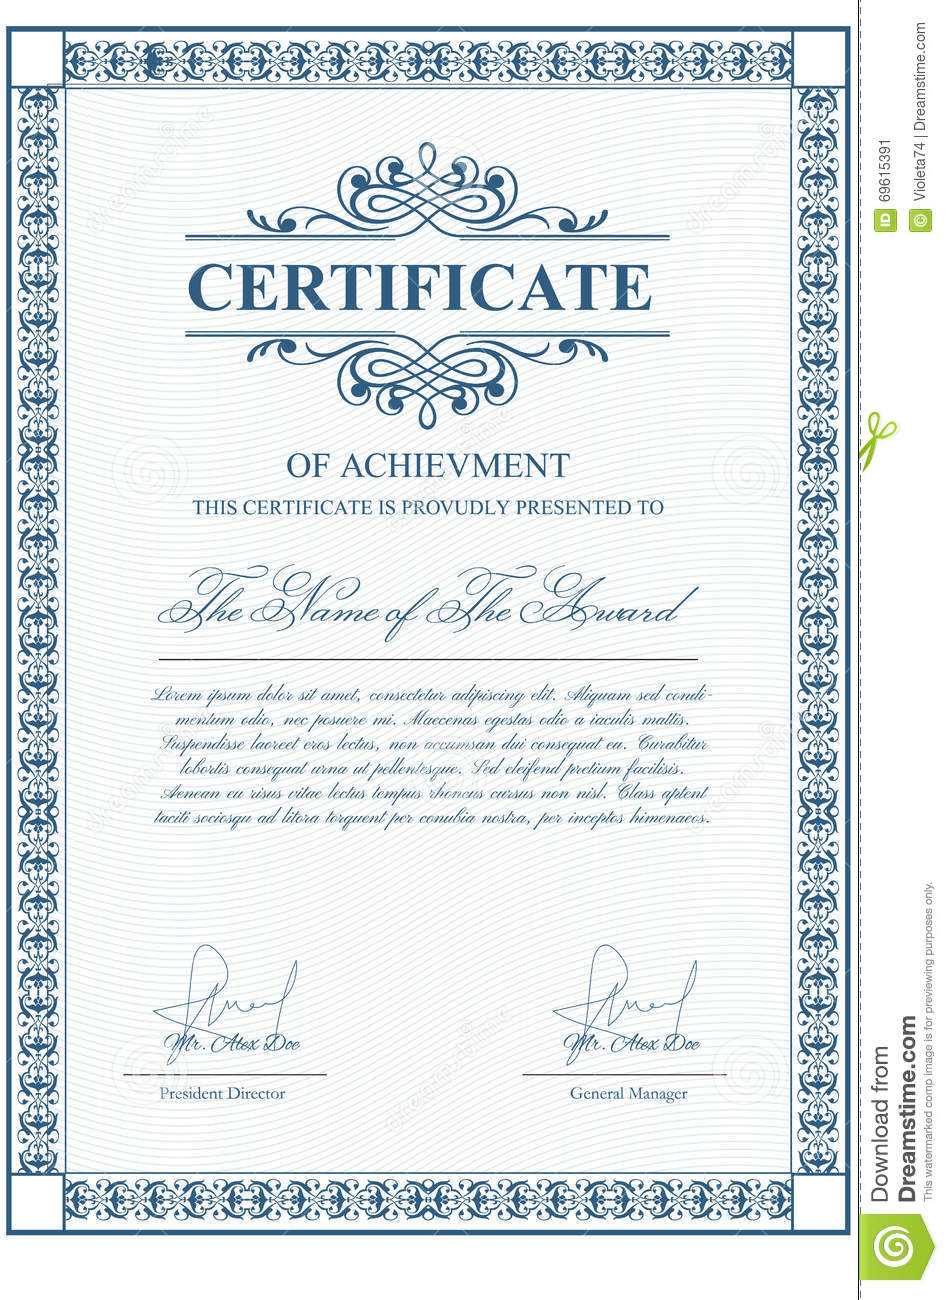 Certificate Template With Guilloche Elements. Stock Vector Within Validation Certificate Template